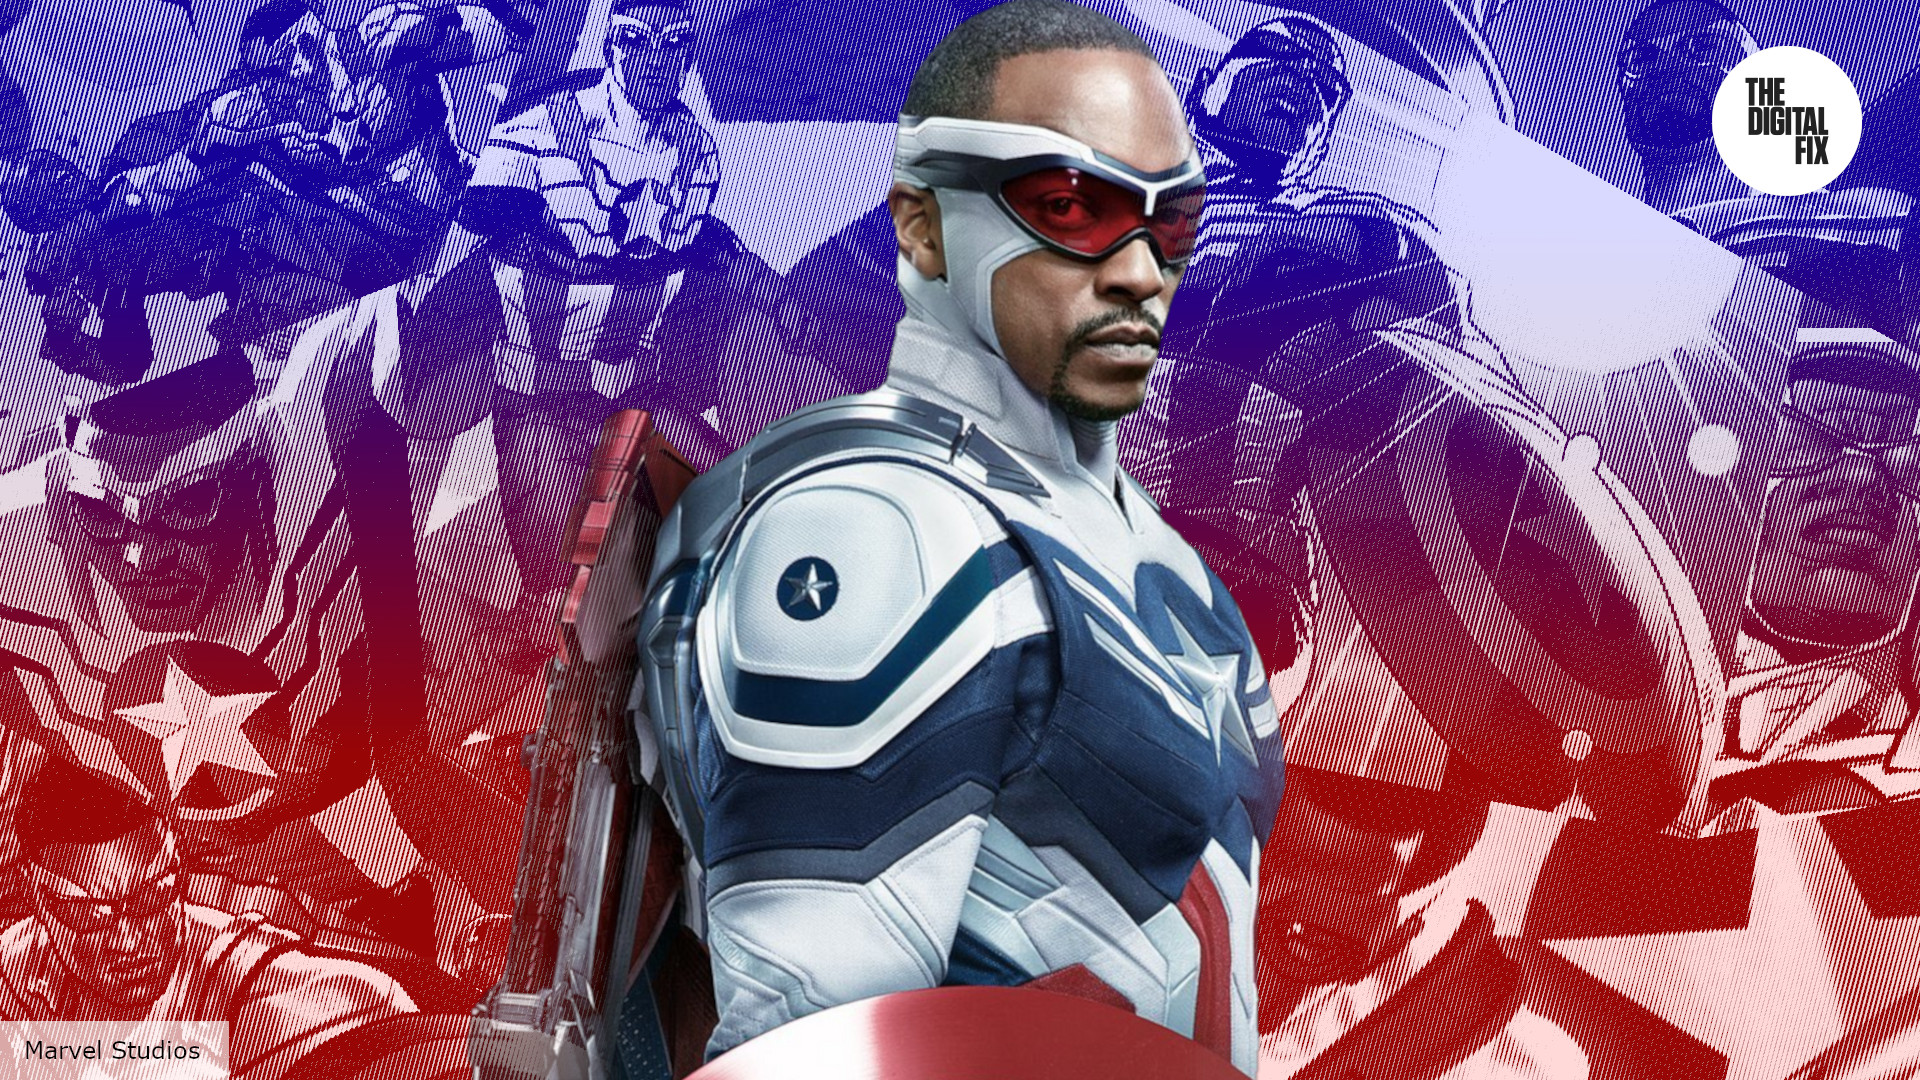 Captain America 4 release date, cast, plot, trailer, and more news